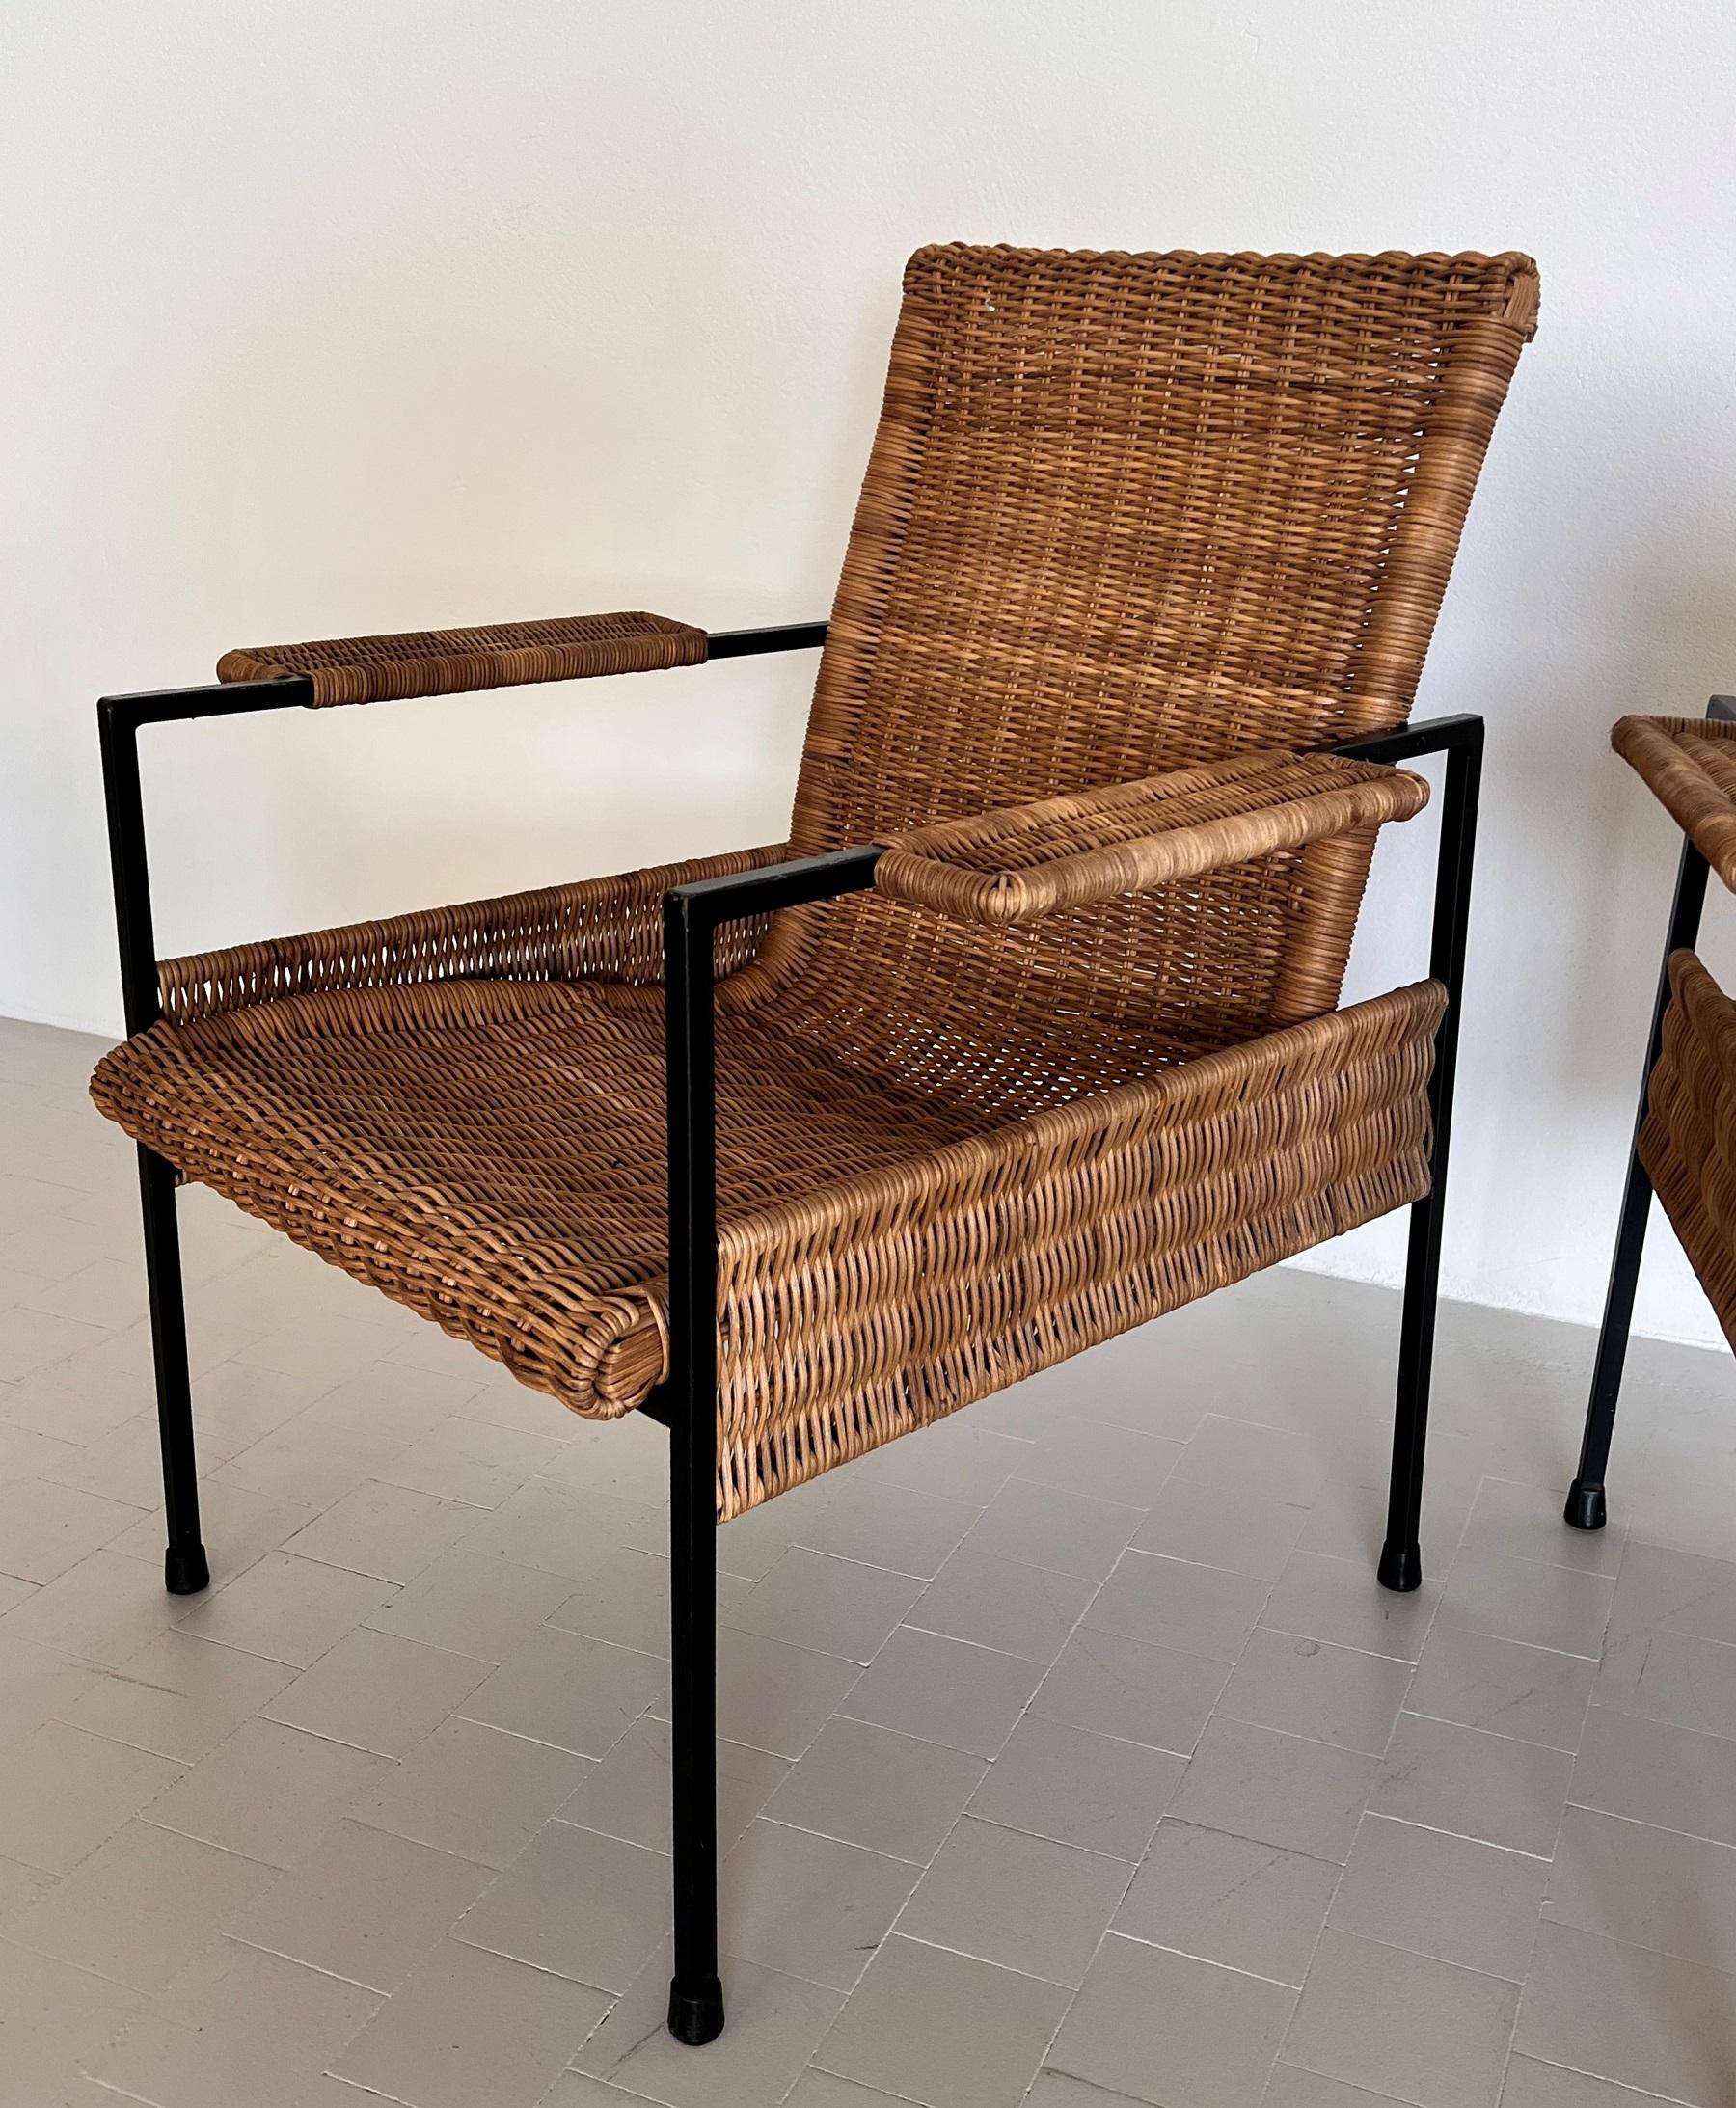 20th Century Italian Comfortable Midcentury Rattan Wicker and Iron Lounge Chairs, set of 4 For Sale